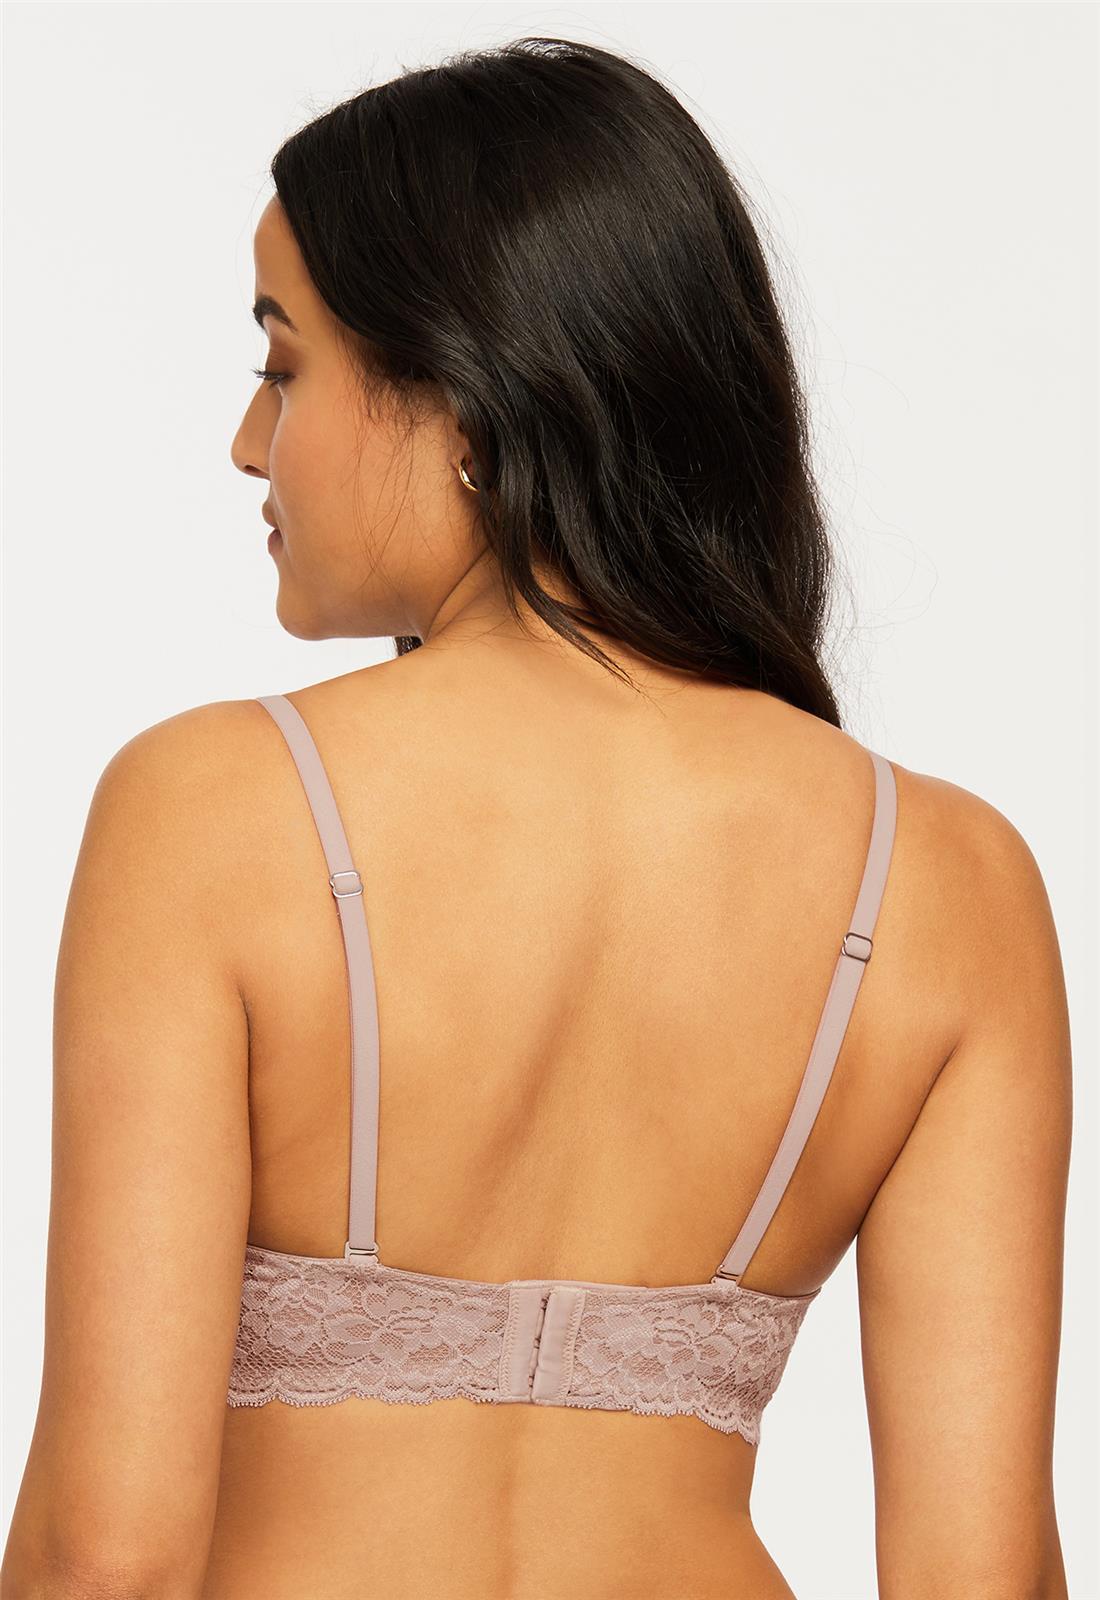 Cup-Sized Lace Bralette - Moonshell worn by model back view